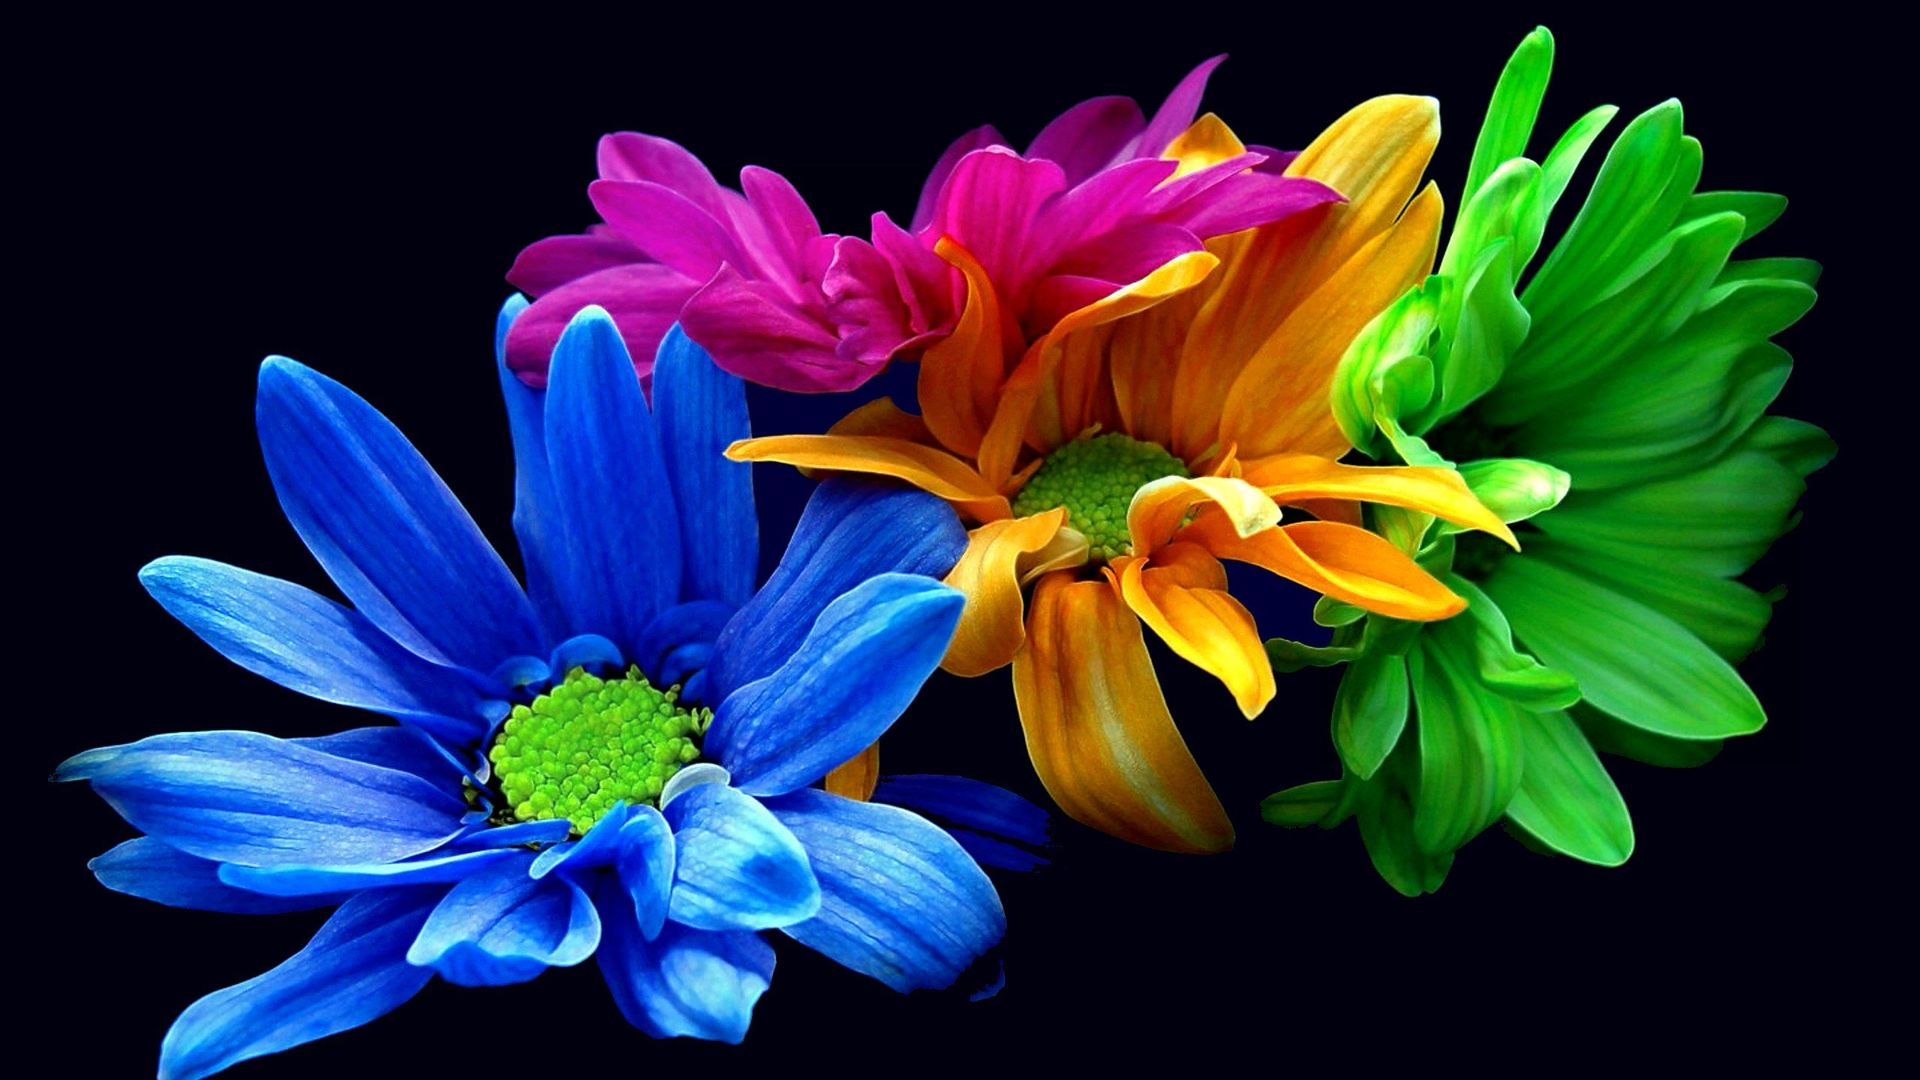 Colorful Flowers Black Background - 1920x1080 Wallpaper 